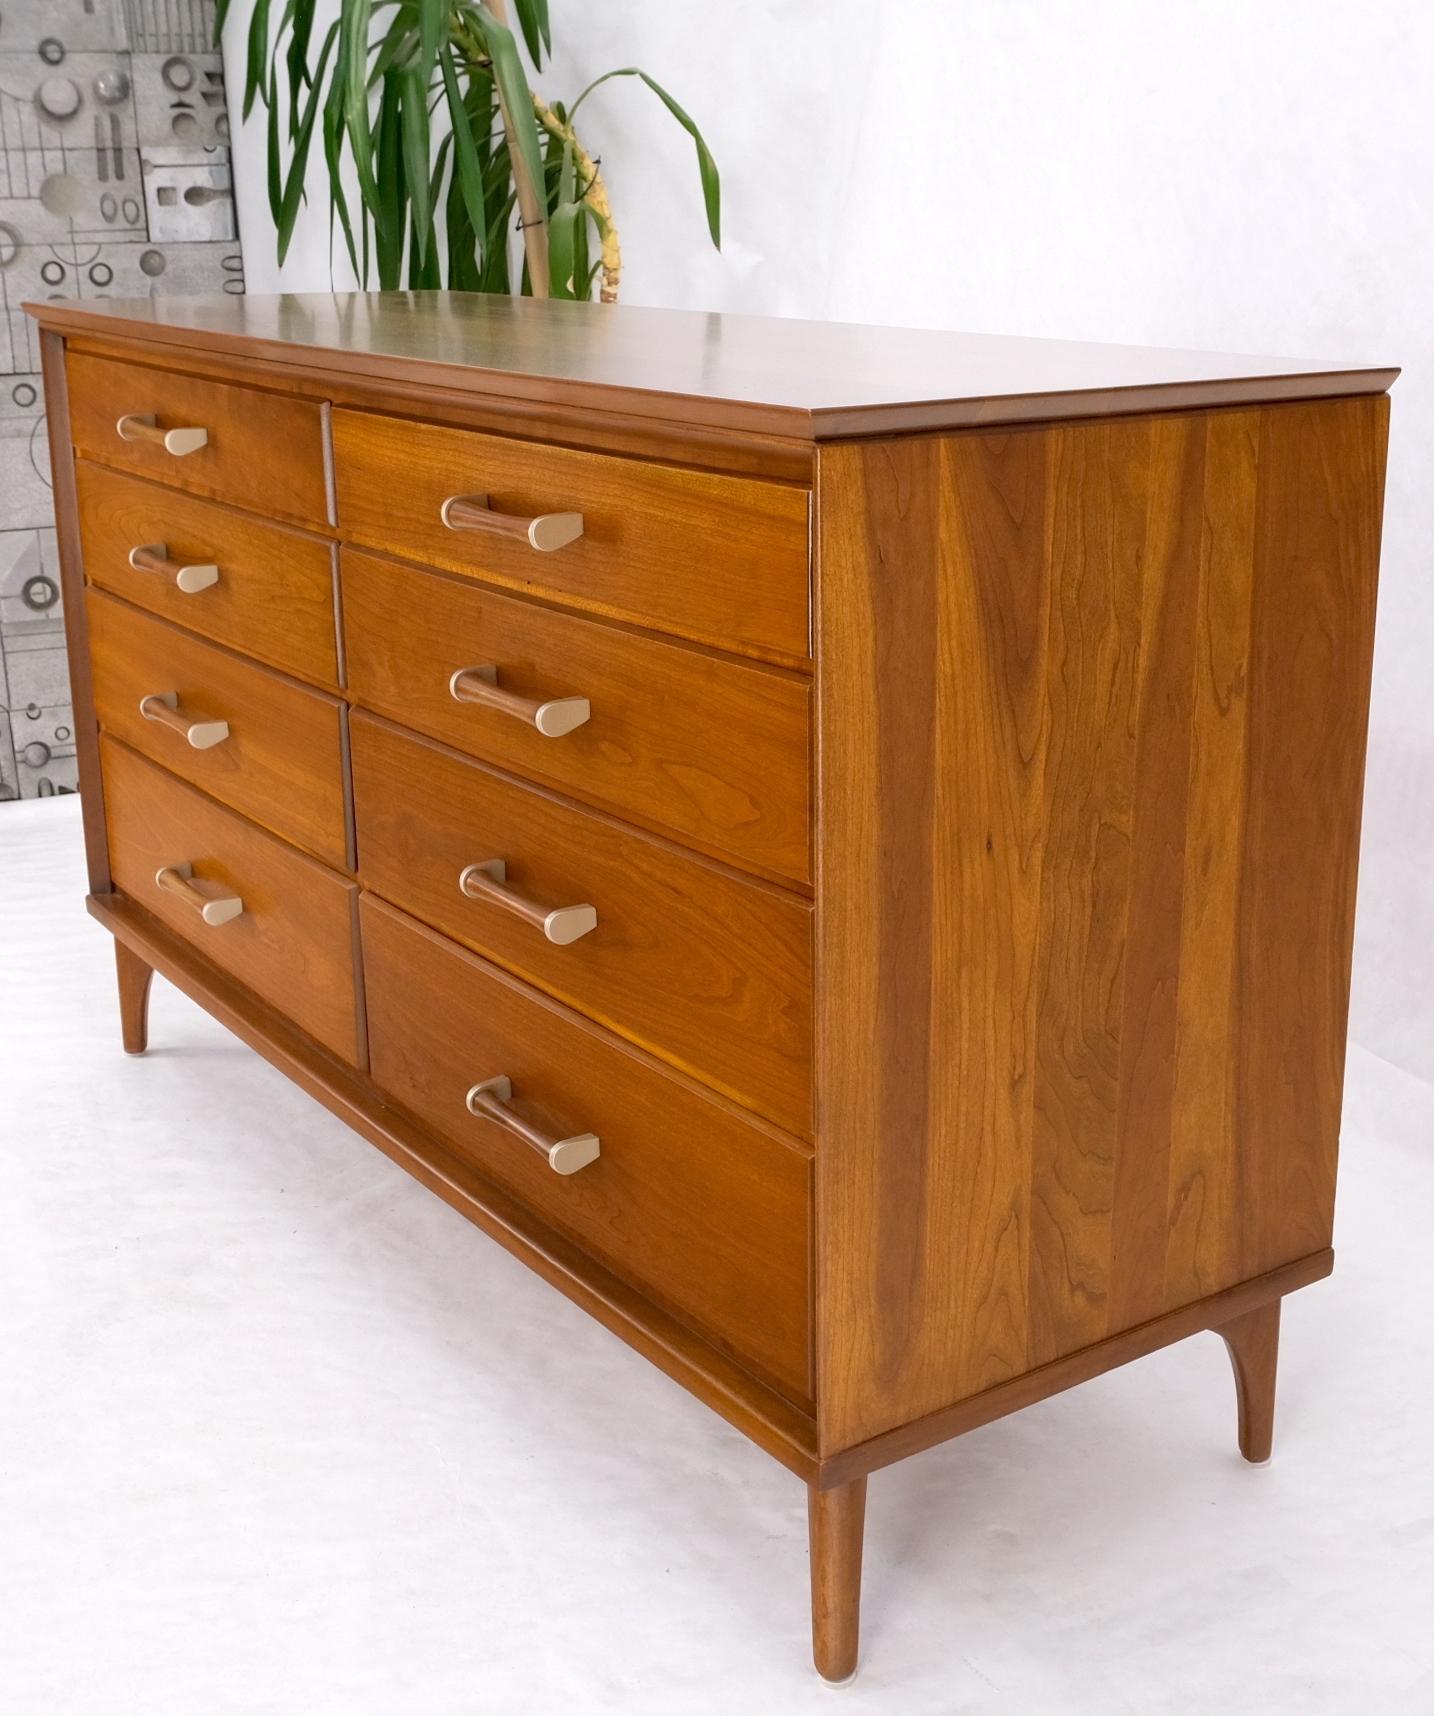 Solid Cherry Mid-Century Modern 8 Drawers Long Credenza Dresser Renzo Ruttily For Sale 9